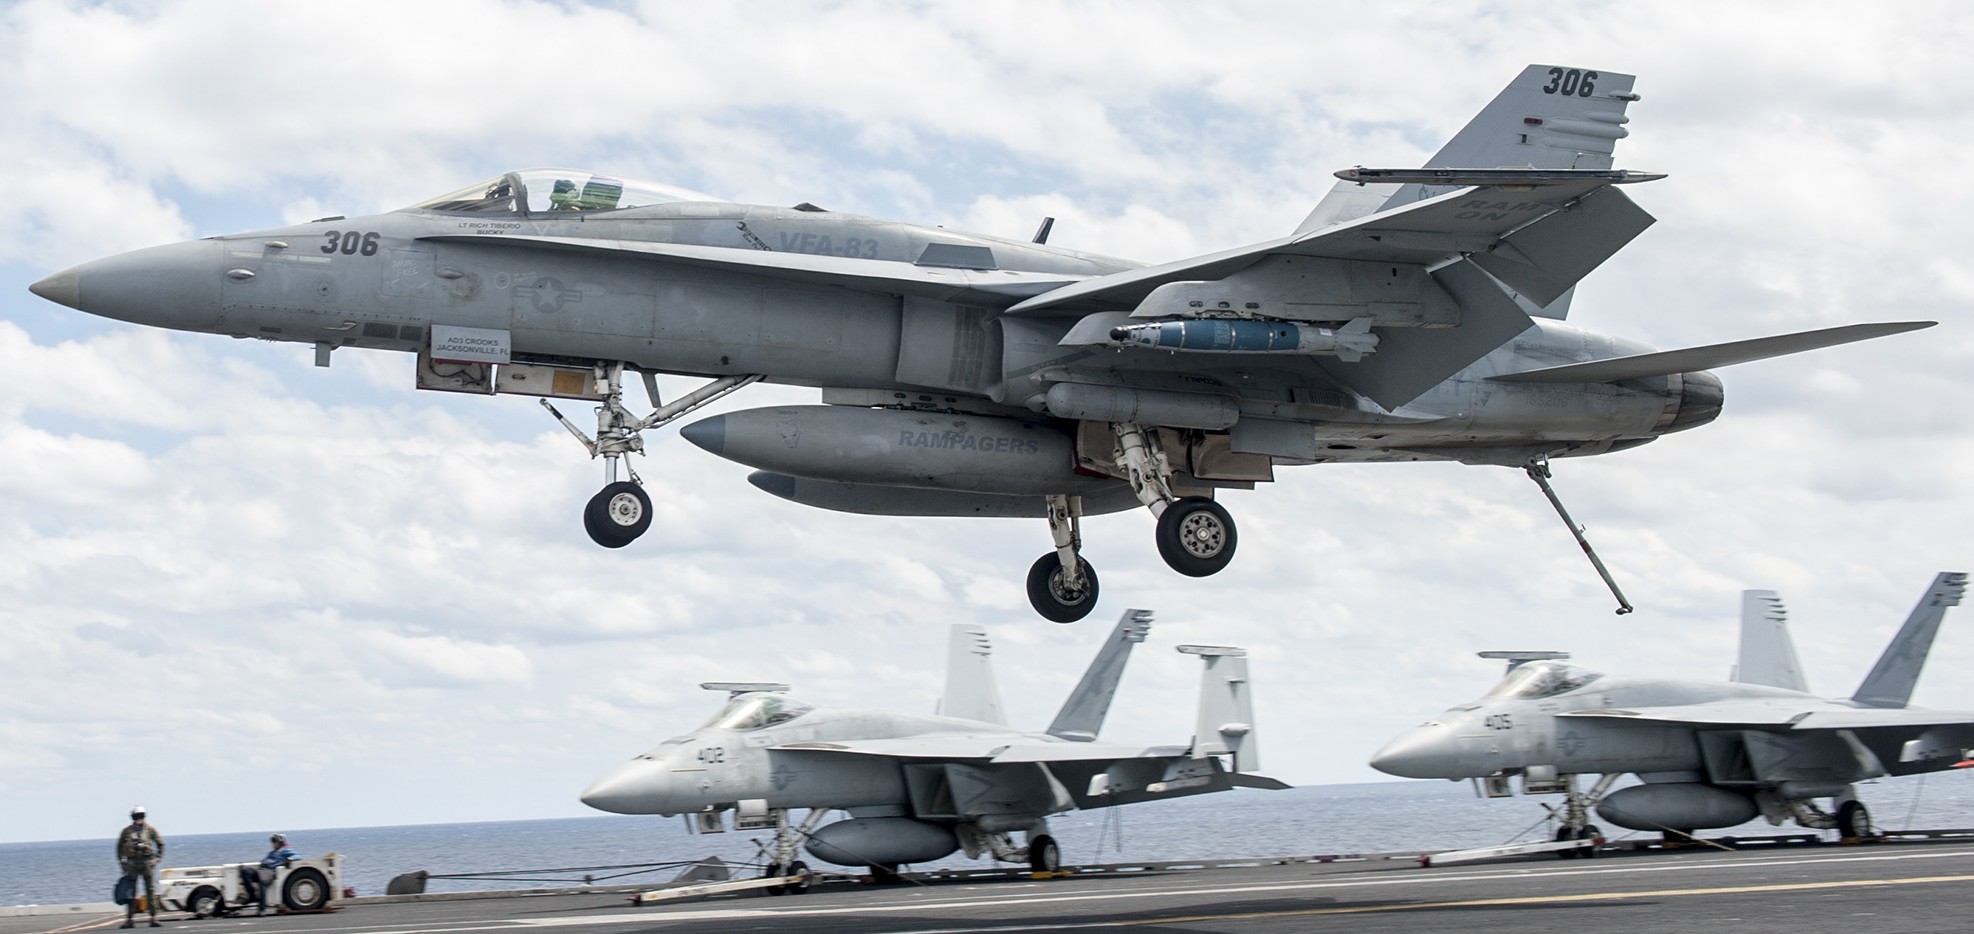 vfa-83 rampagers strike fighter squadron f/a-18c hornet cvw-7 uss harry s. truman cvn-75 31